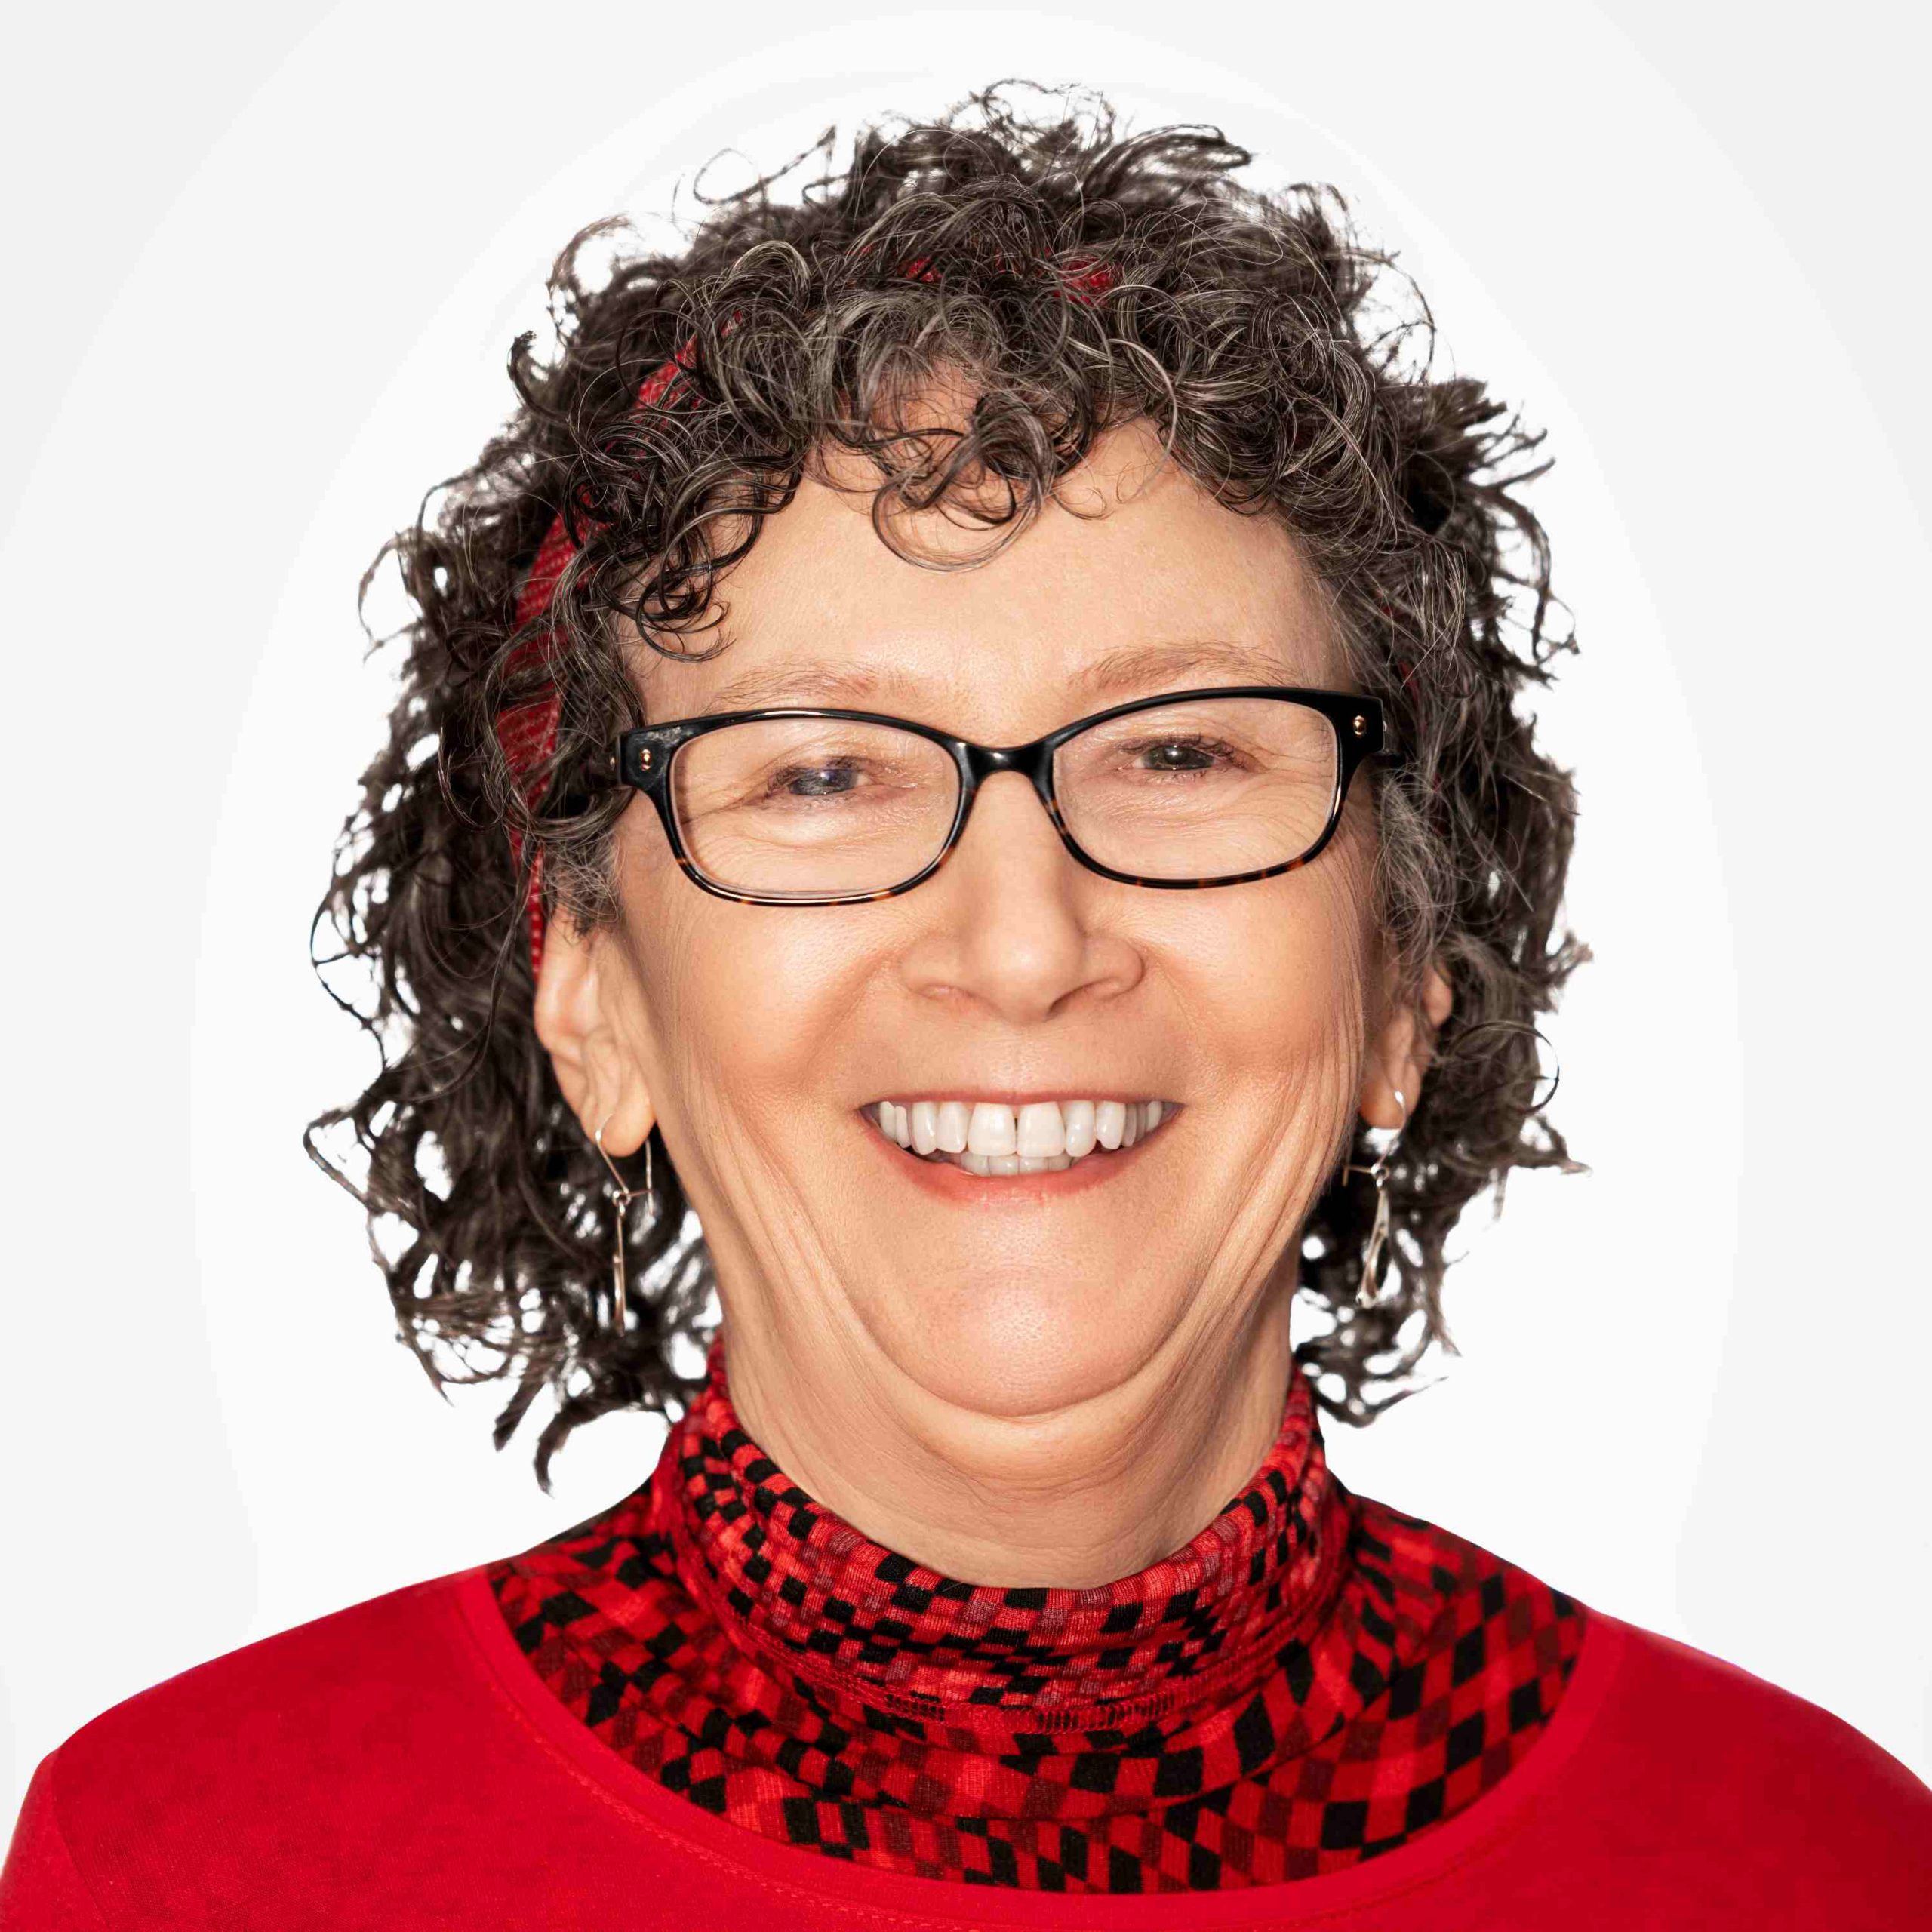 Terri Neff - female, with short dark curly hair wearing glasses and a red sweater and turtleneck